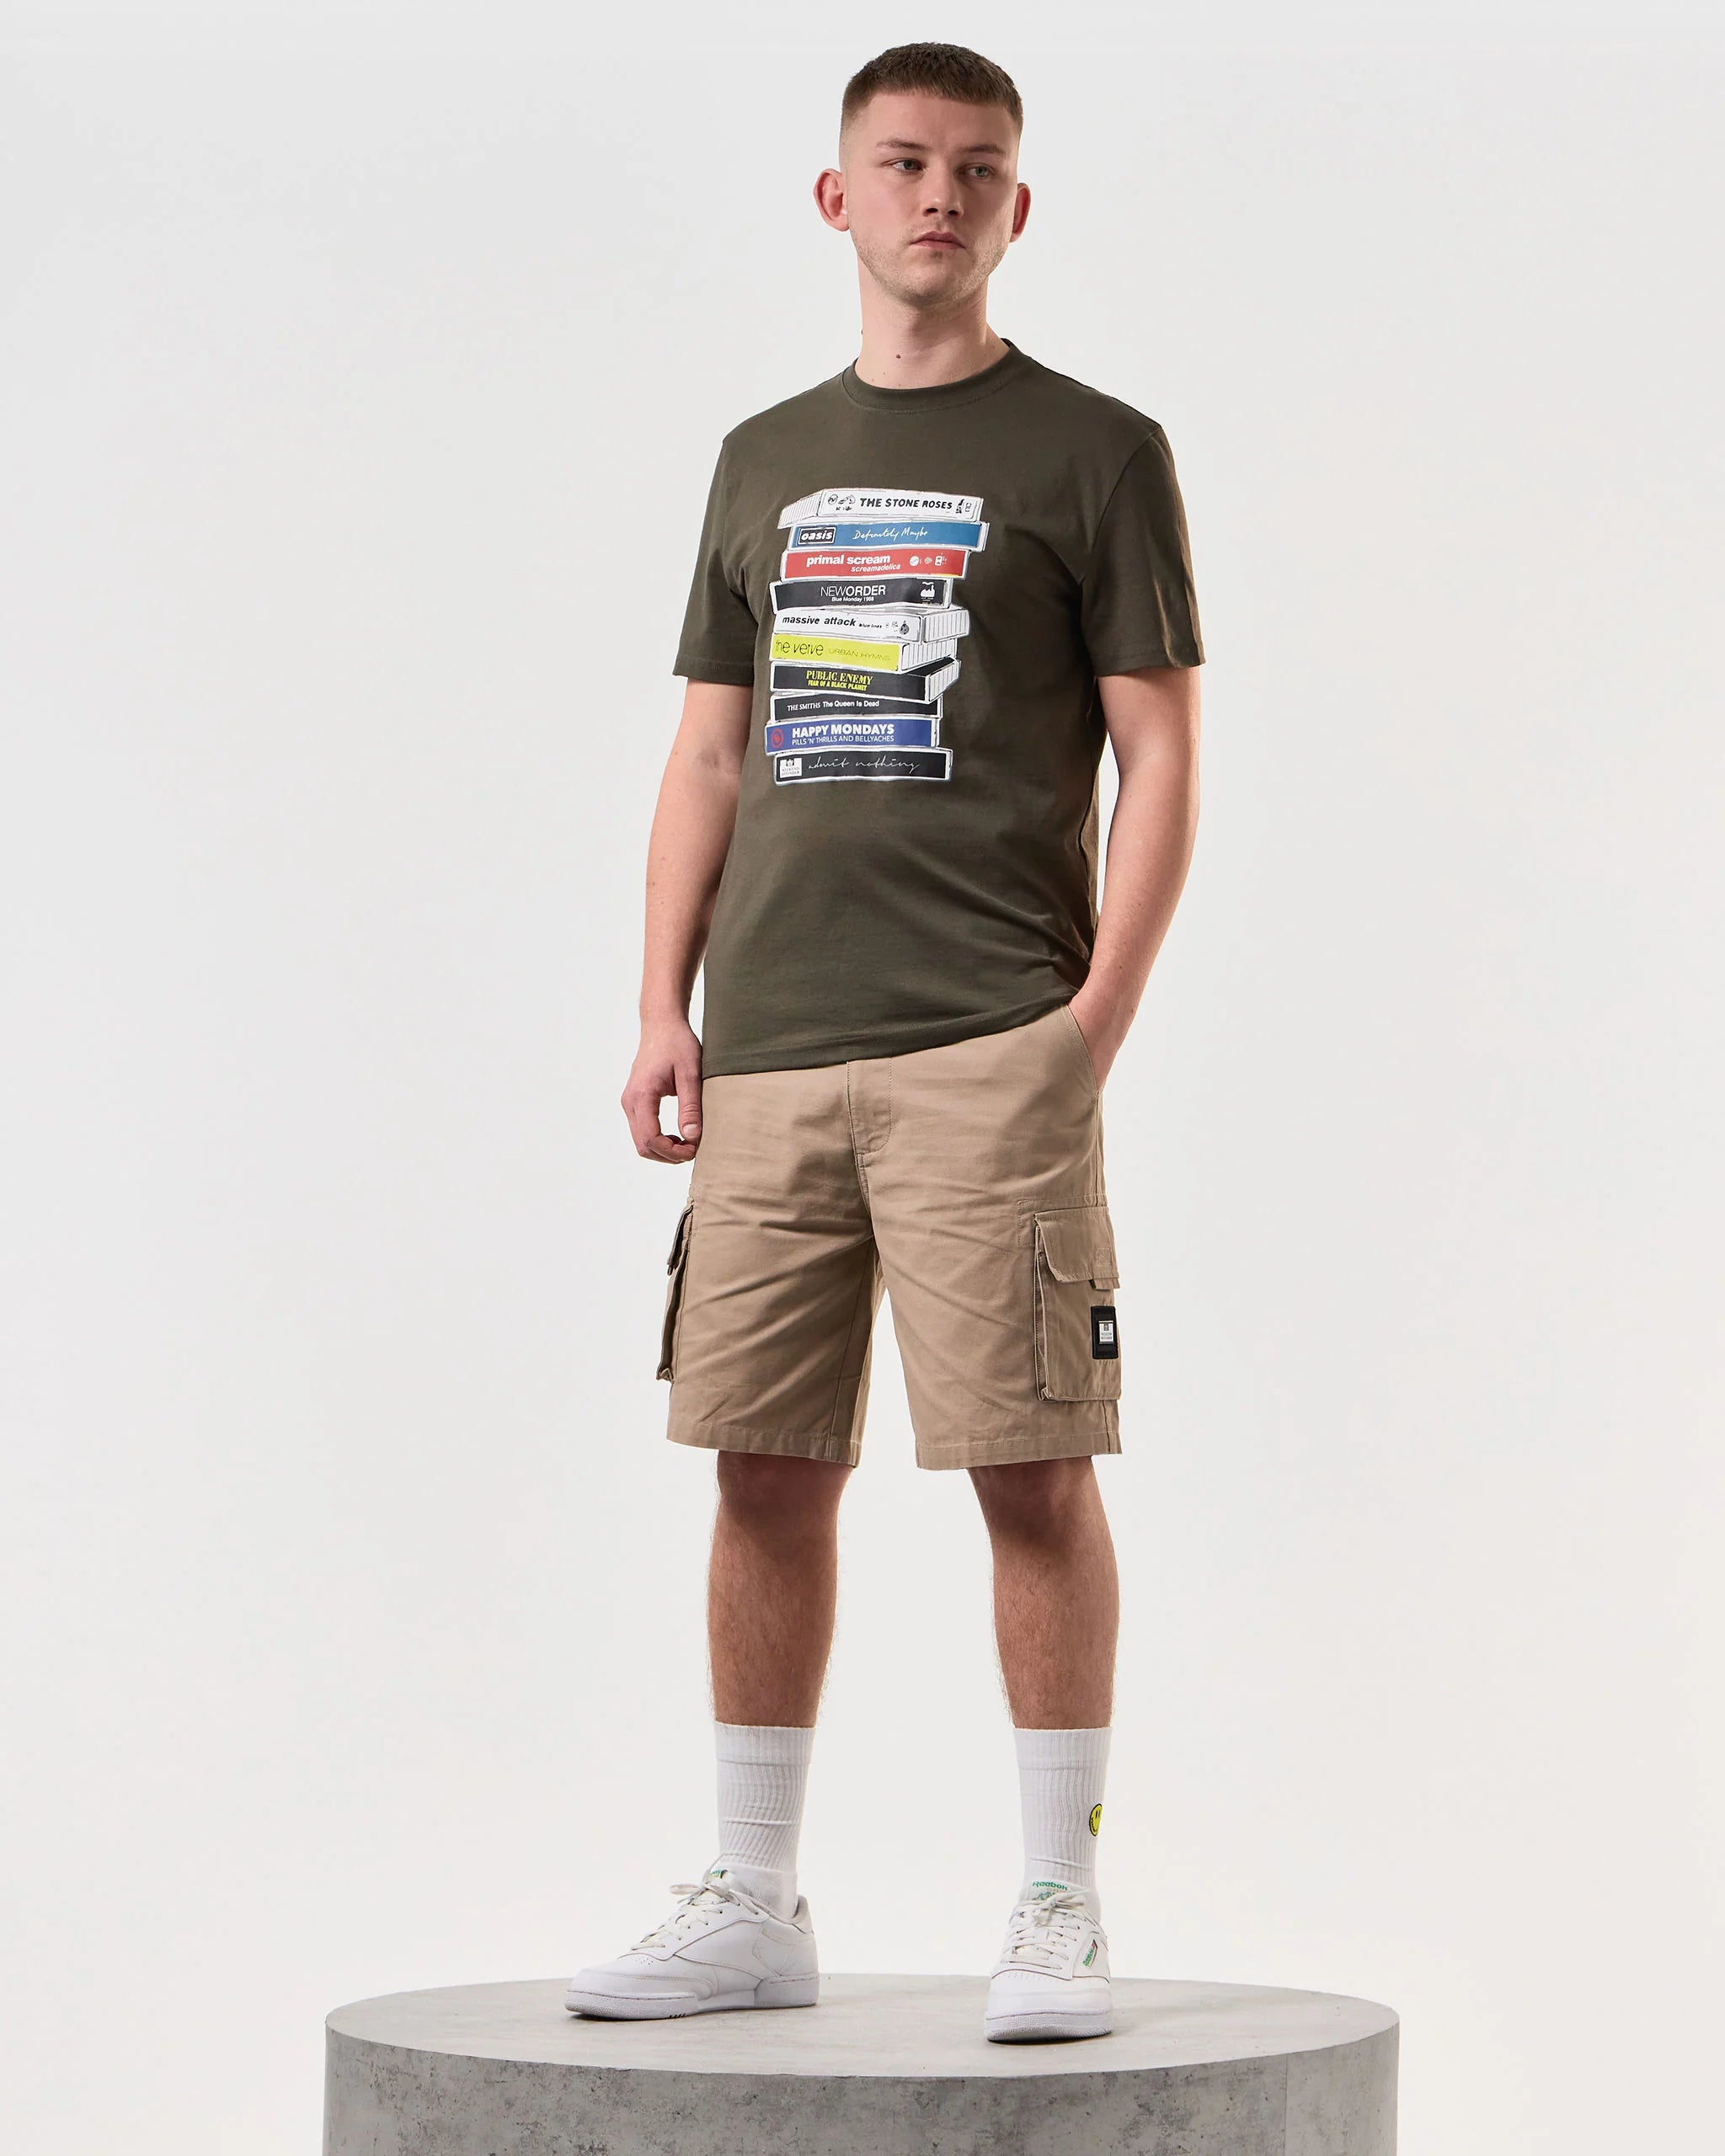 Weekend Offender Cassettes Graphic Tee Castle Green - Raw Menswear